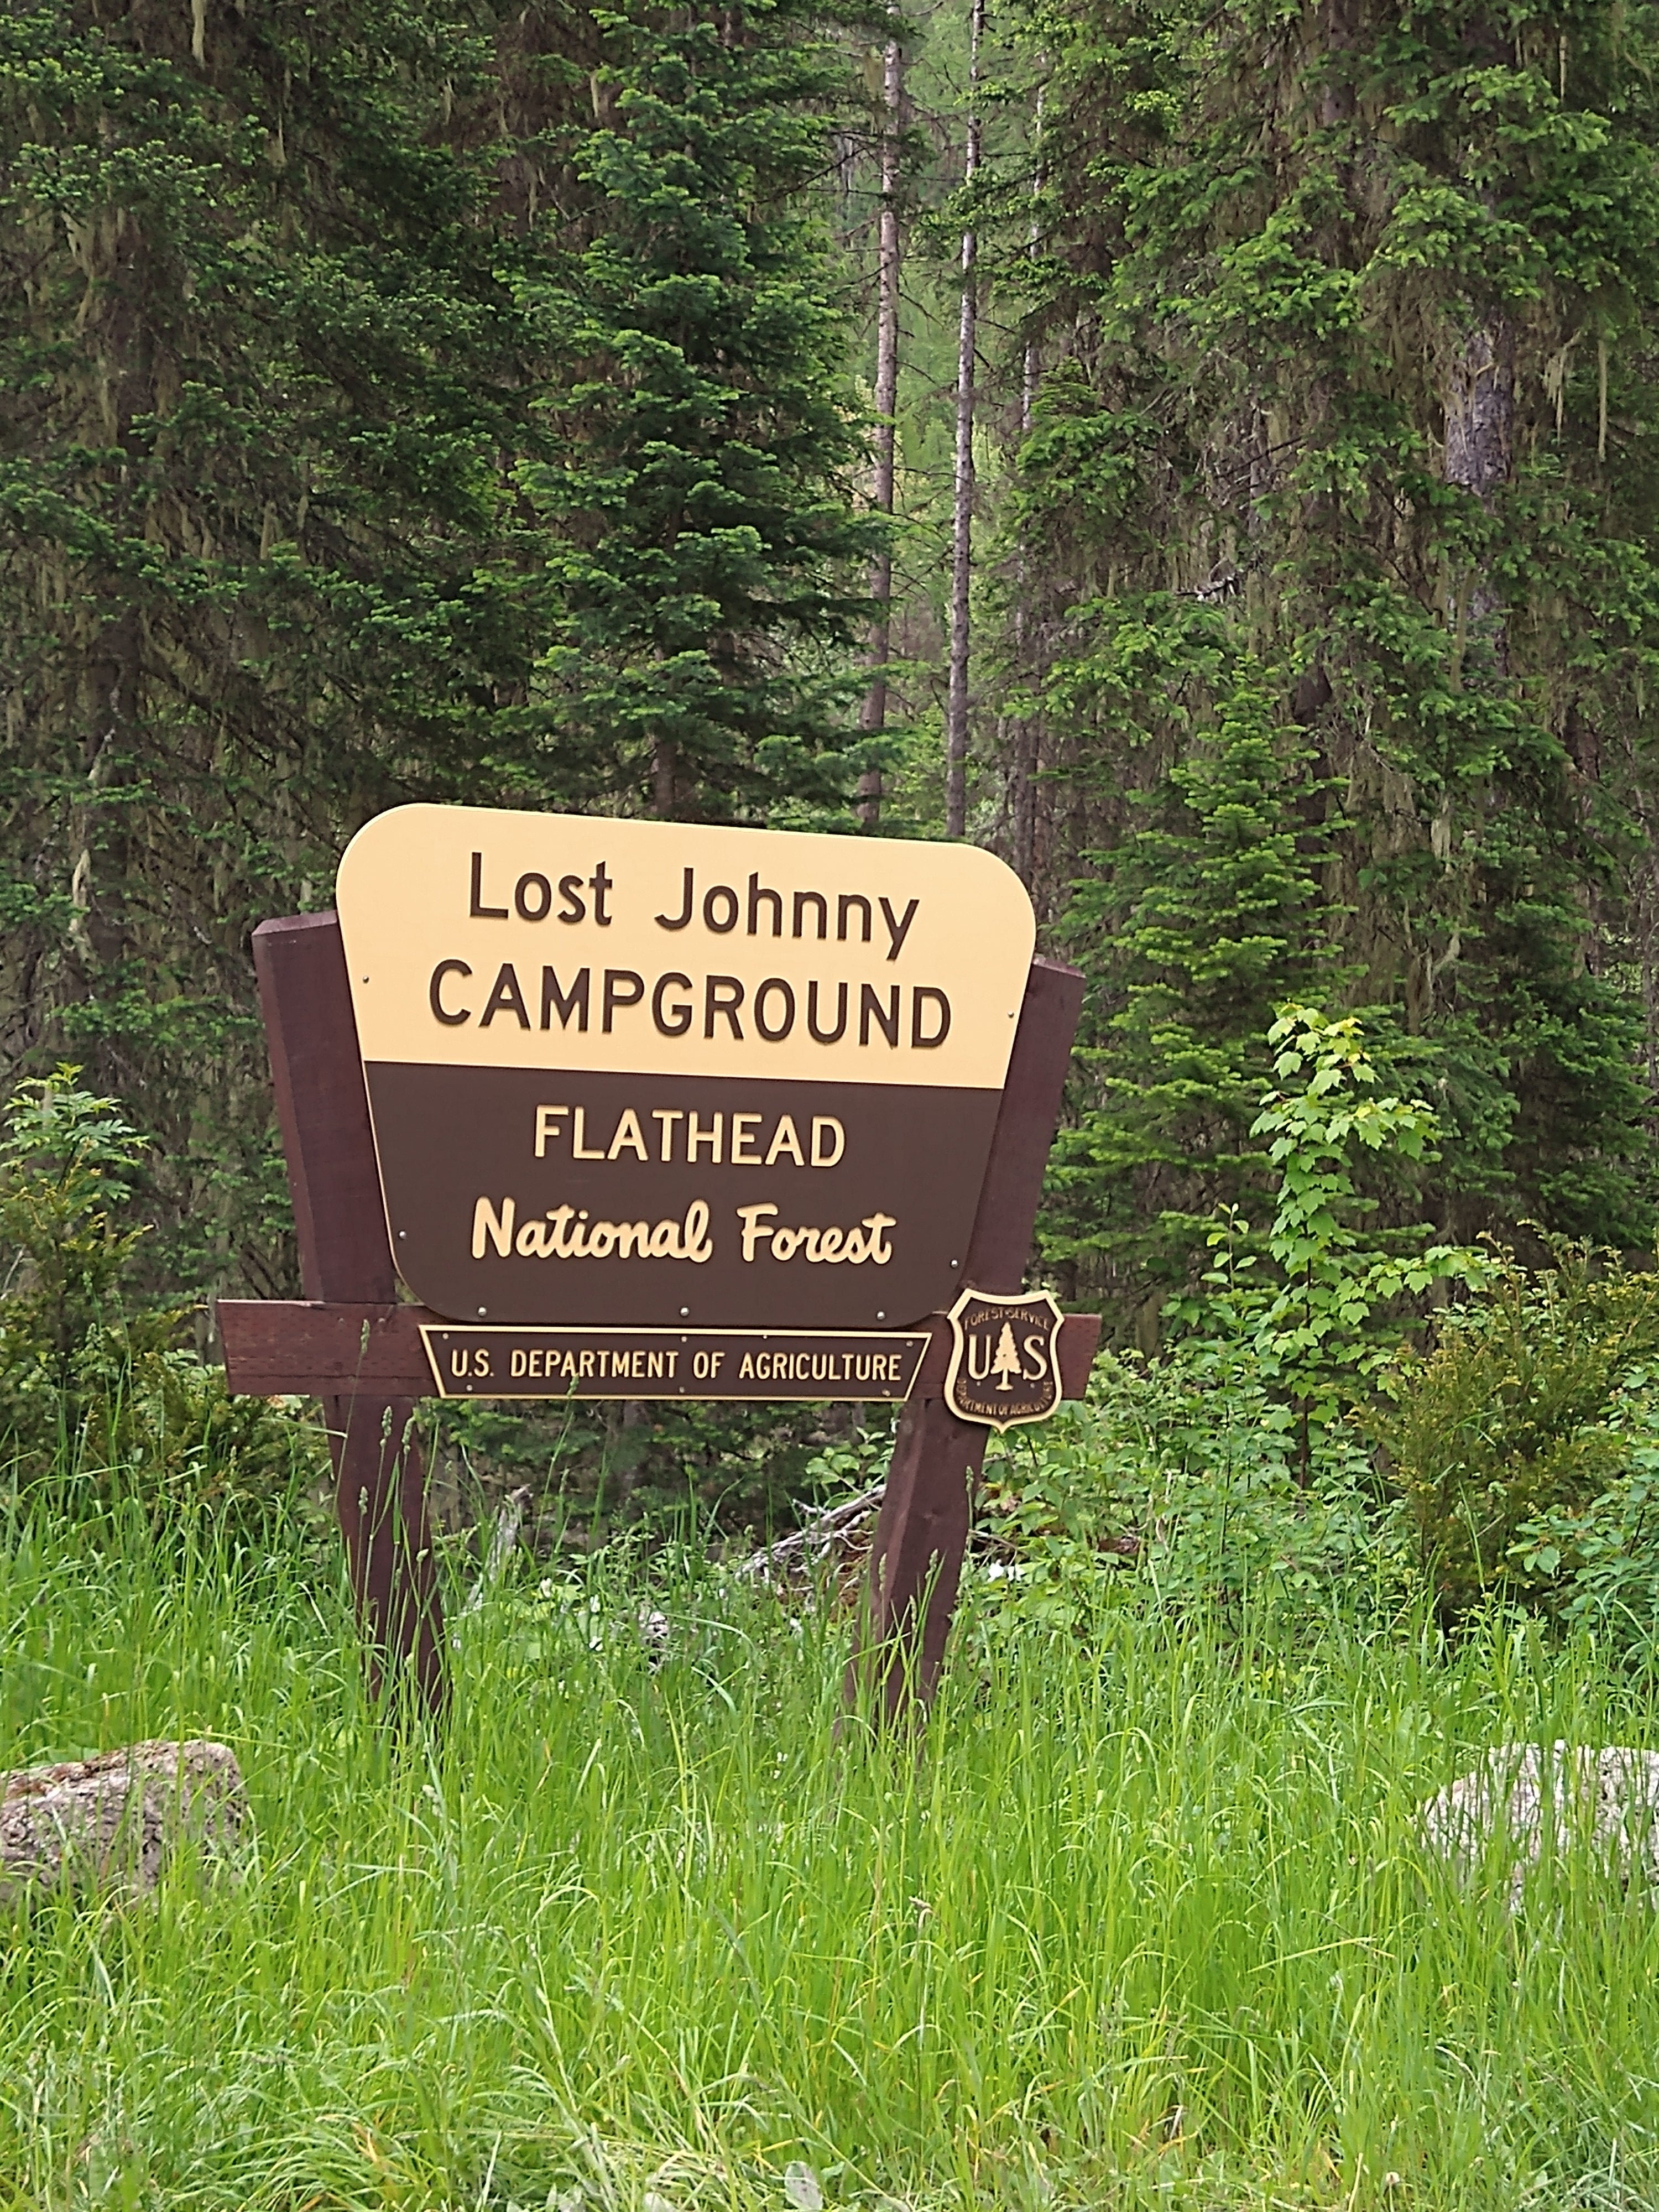 Camper submitted image from Lost Johnny Campground - Flathead National Forest - 3